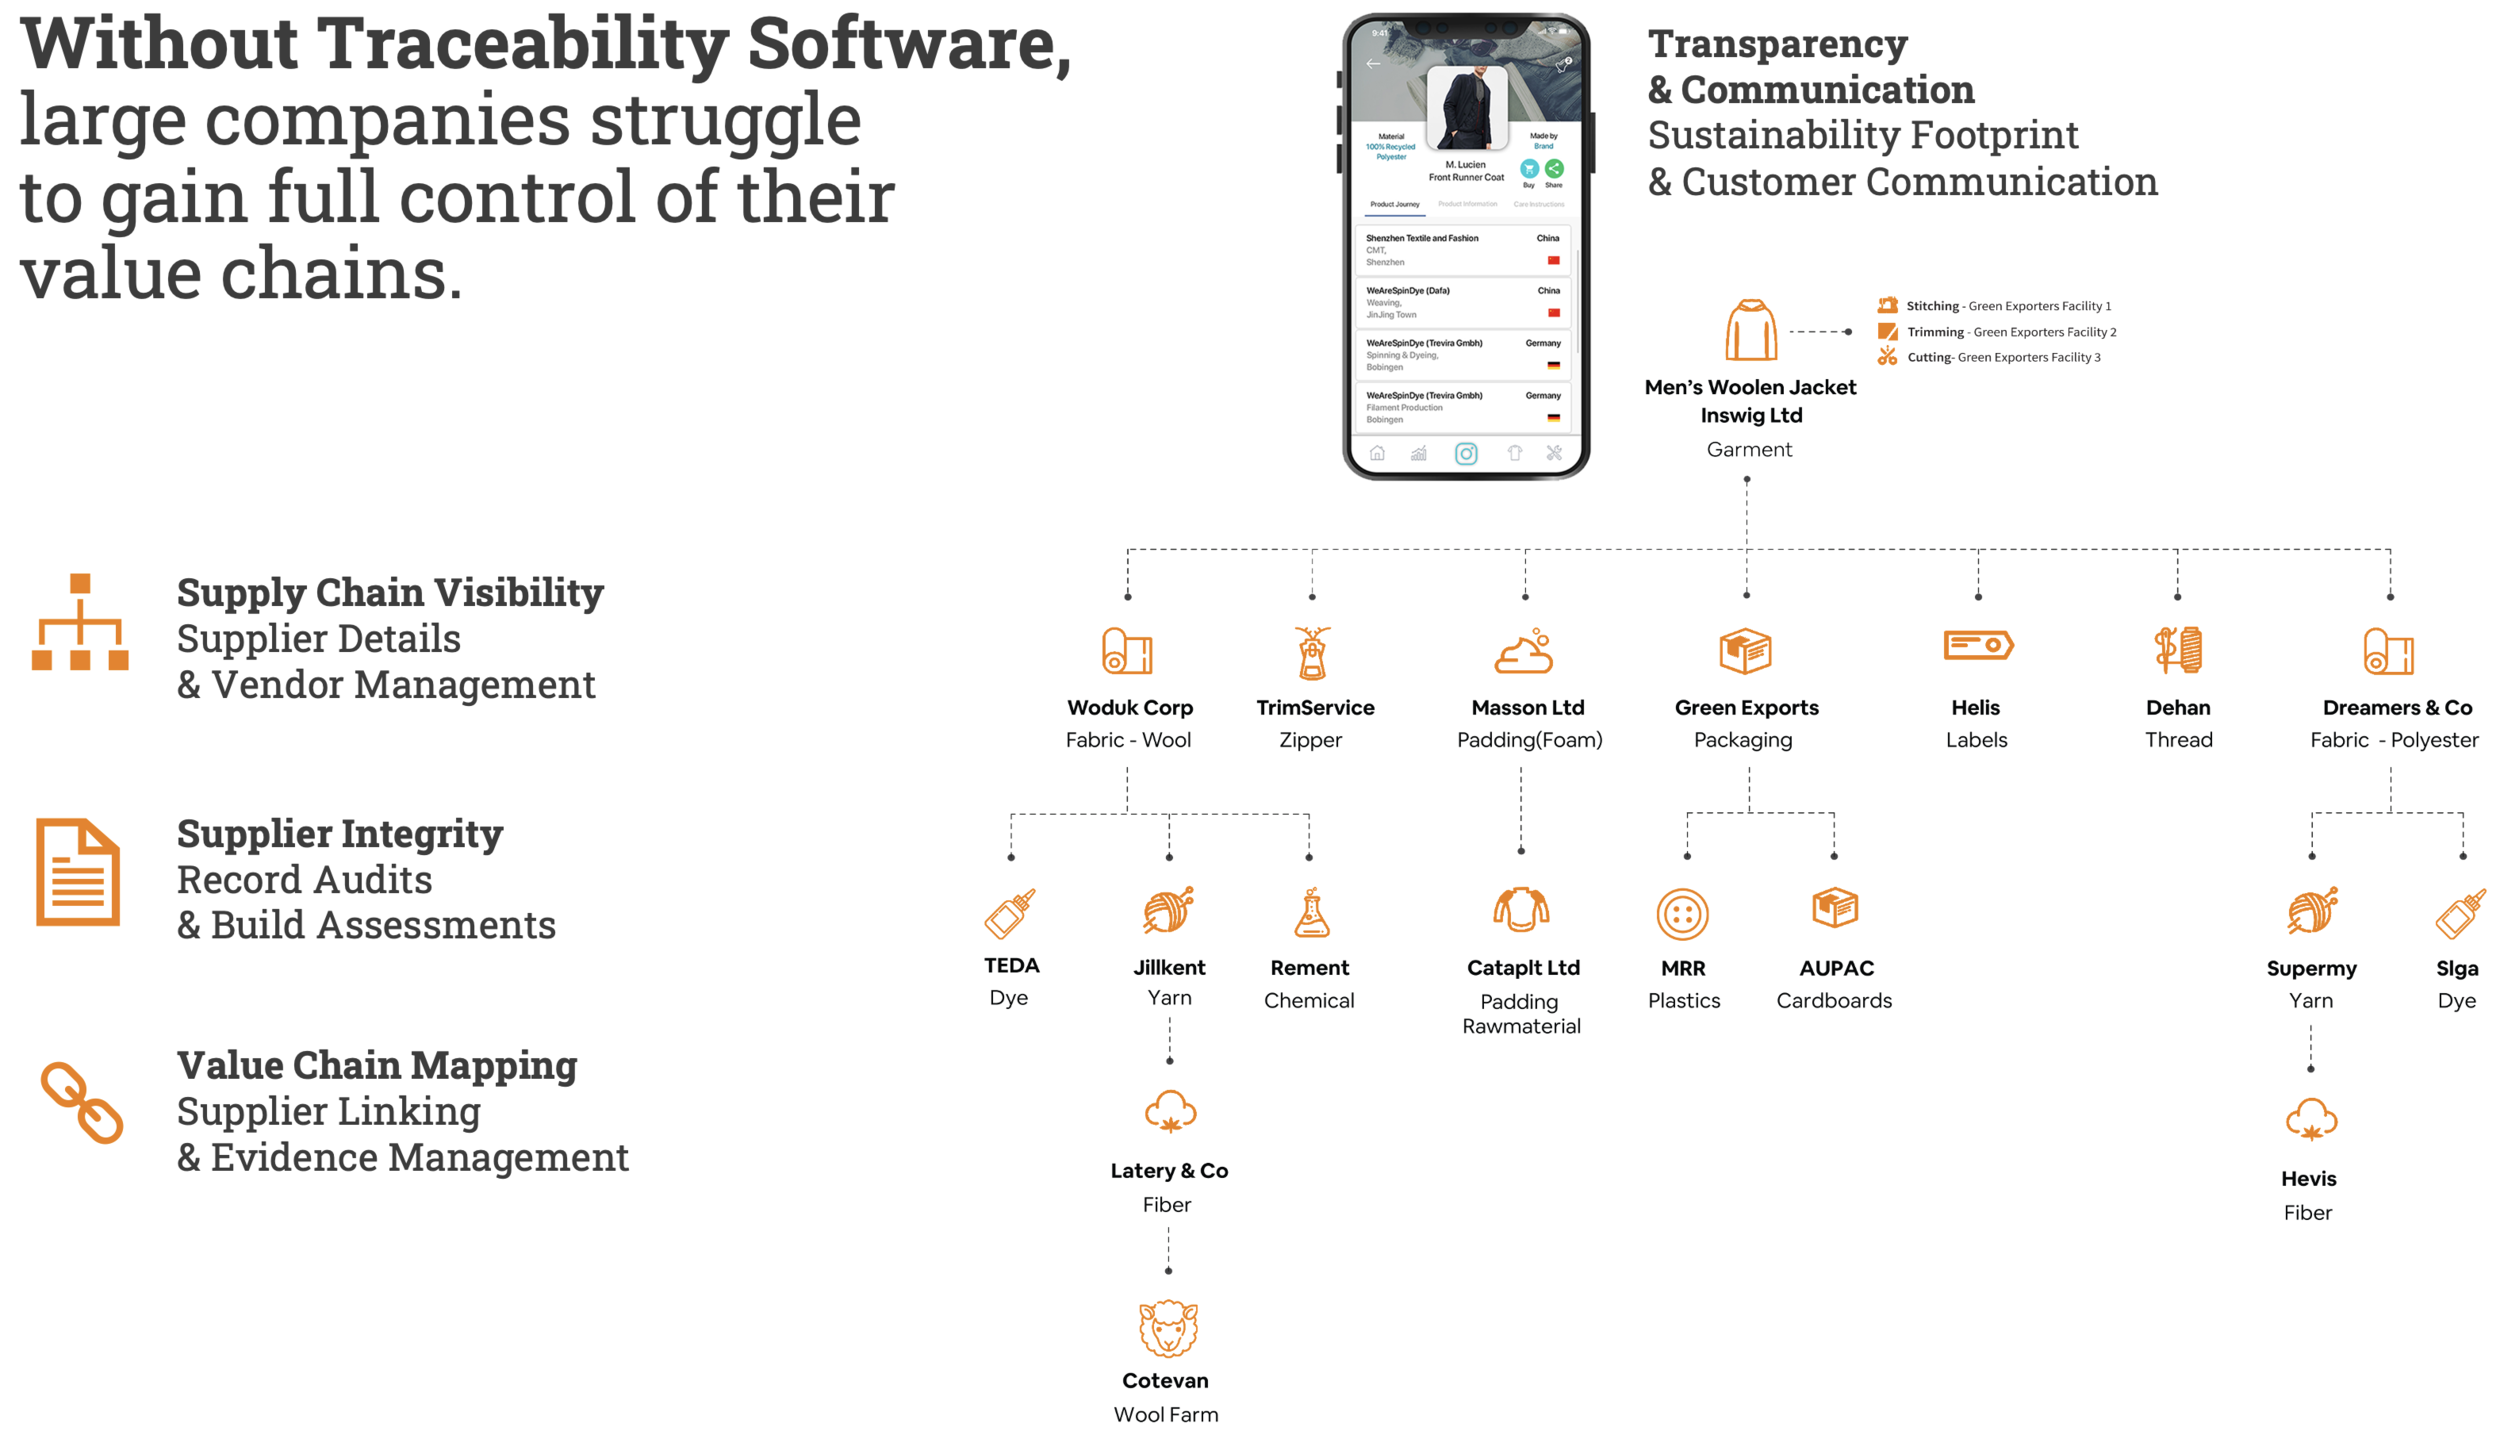 TrusTrace-supply-chain-traceability-software-supply-chain-management-compliance-solution-Product-Traceability-for-fashion-goods